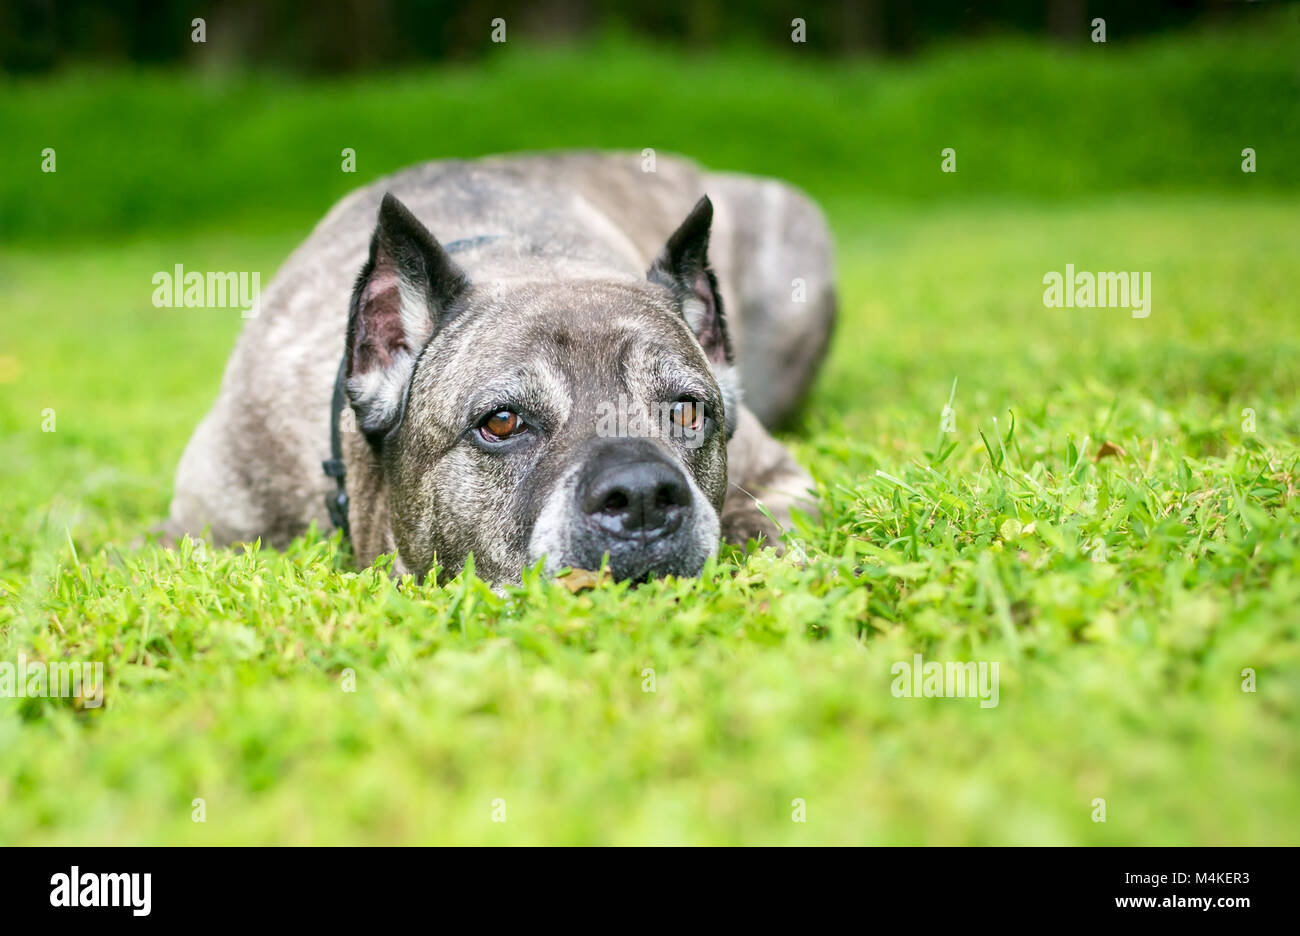 A Cane Corso dog lying in the grass Stock Photo